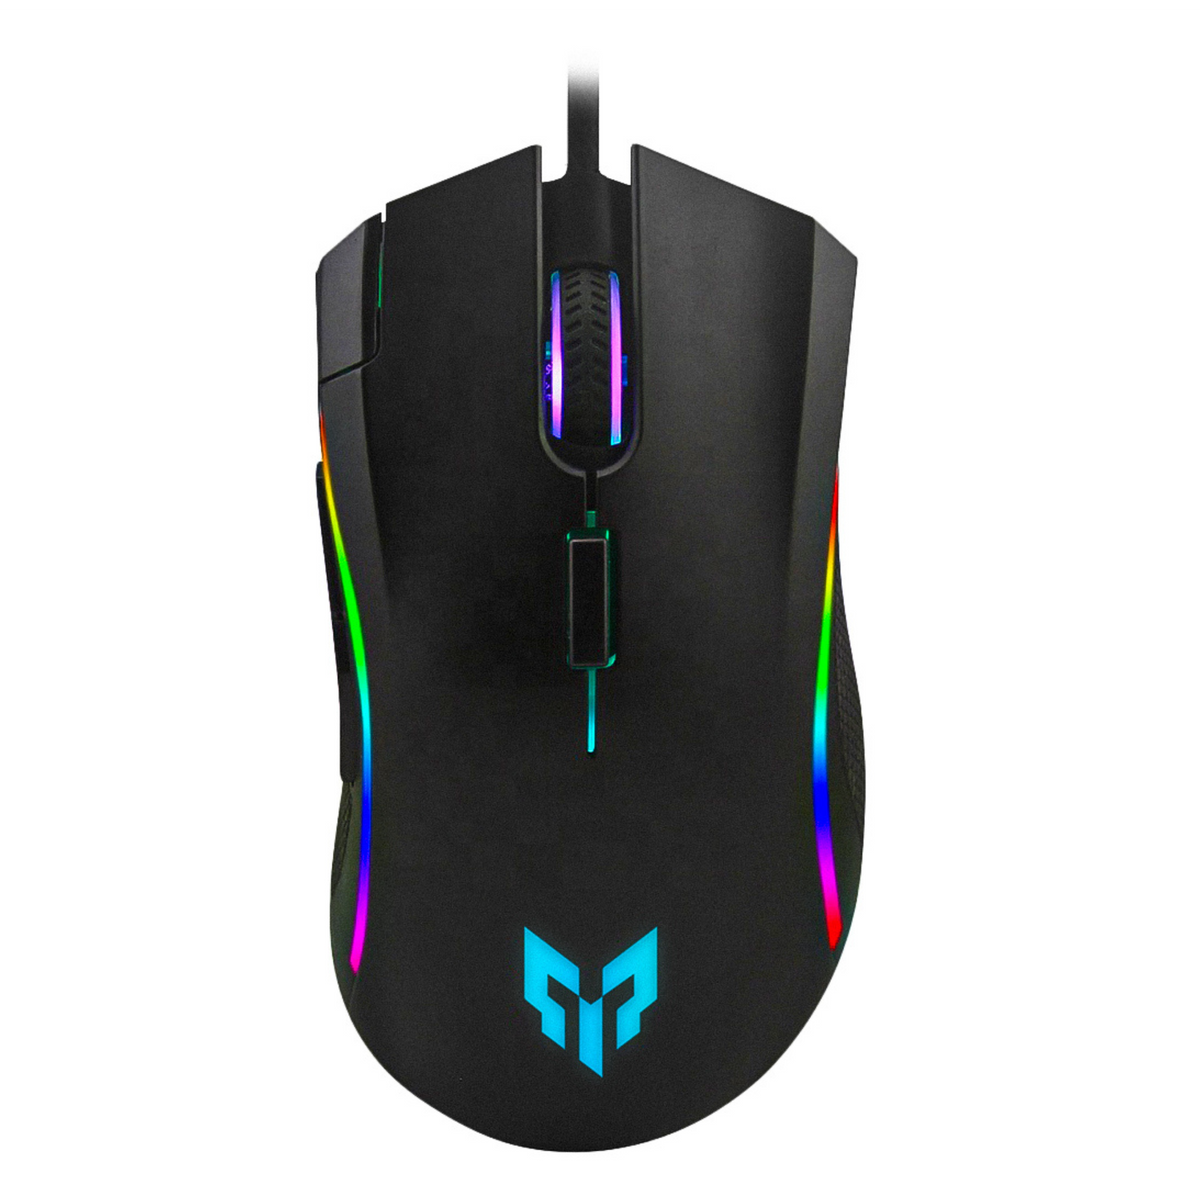 The Mysterious Gamer 24000 DPI Gaming Mouse 3360 Pixart